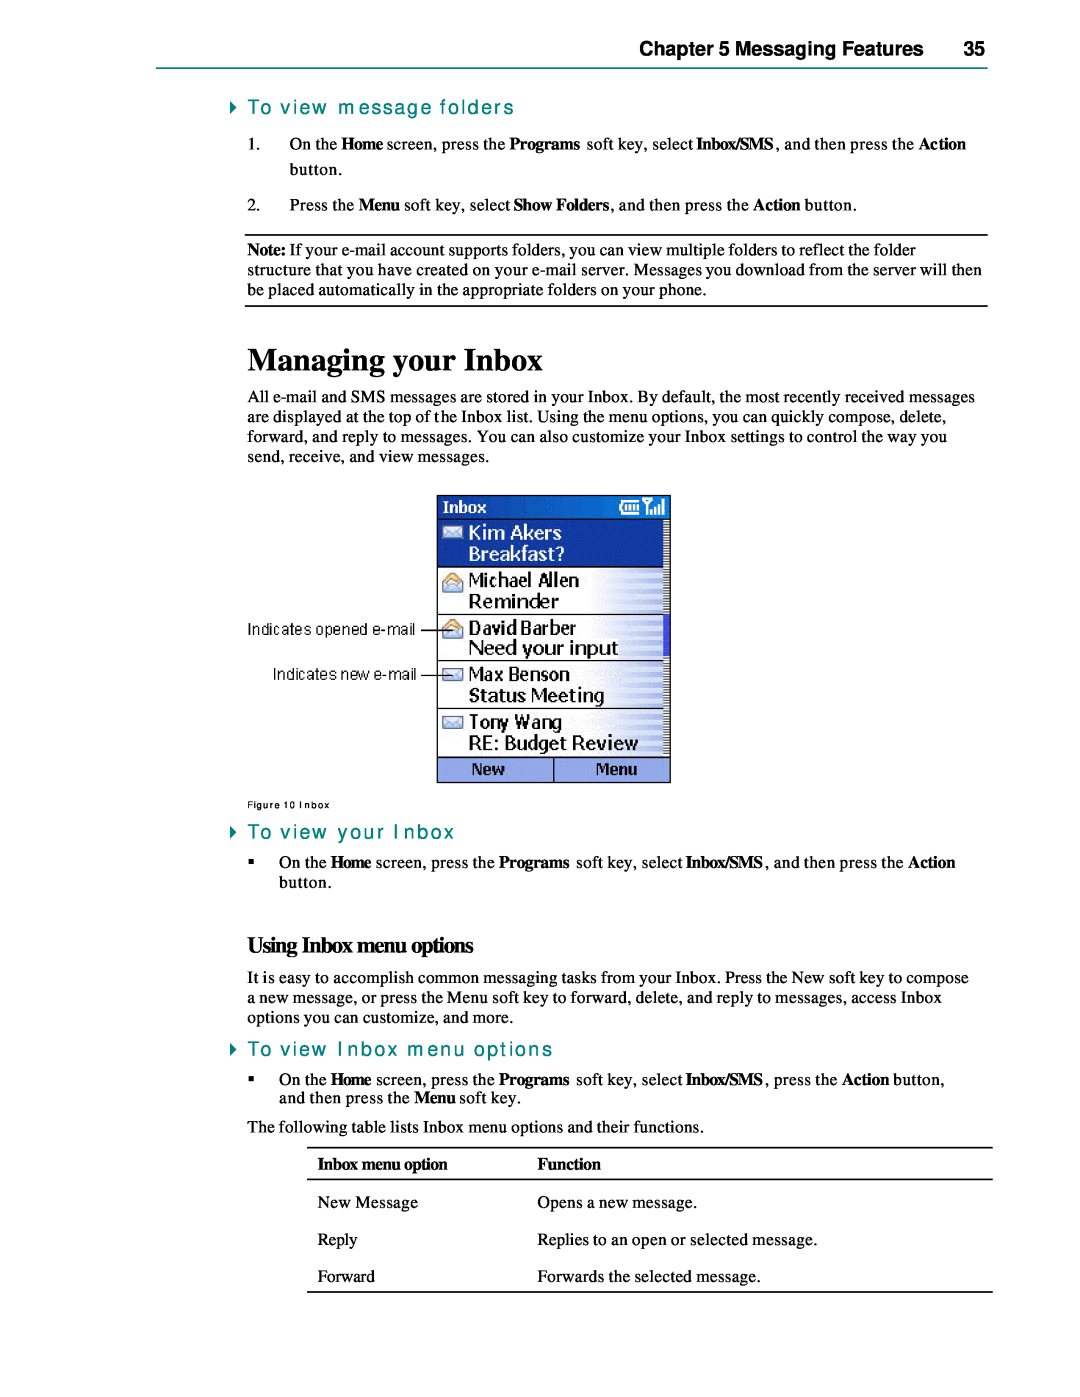 Microsoft Smartphone 2002 manual Managing your Inbox, Using Inbox menu options, Messaging Features, To view message folders 